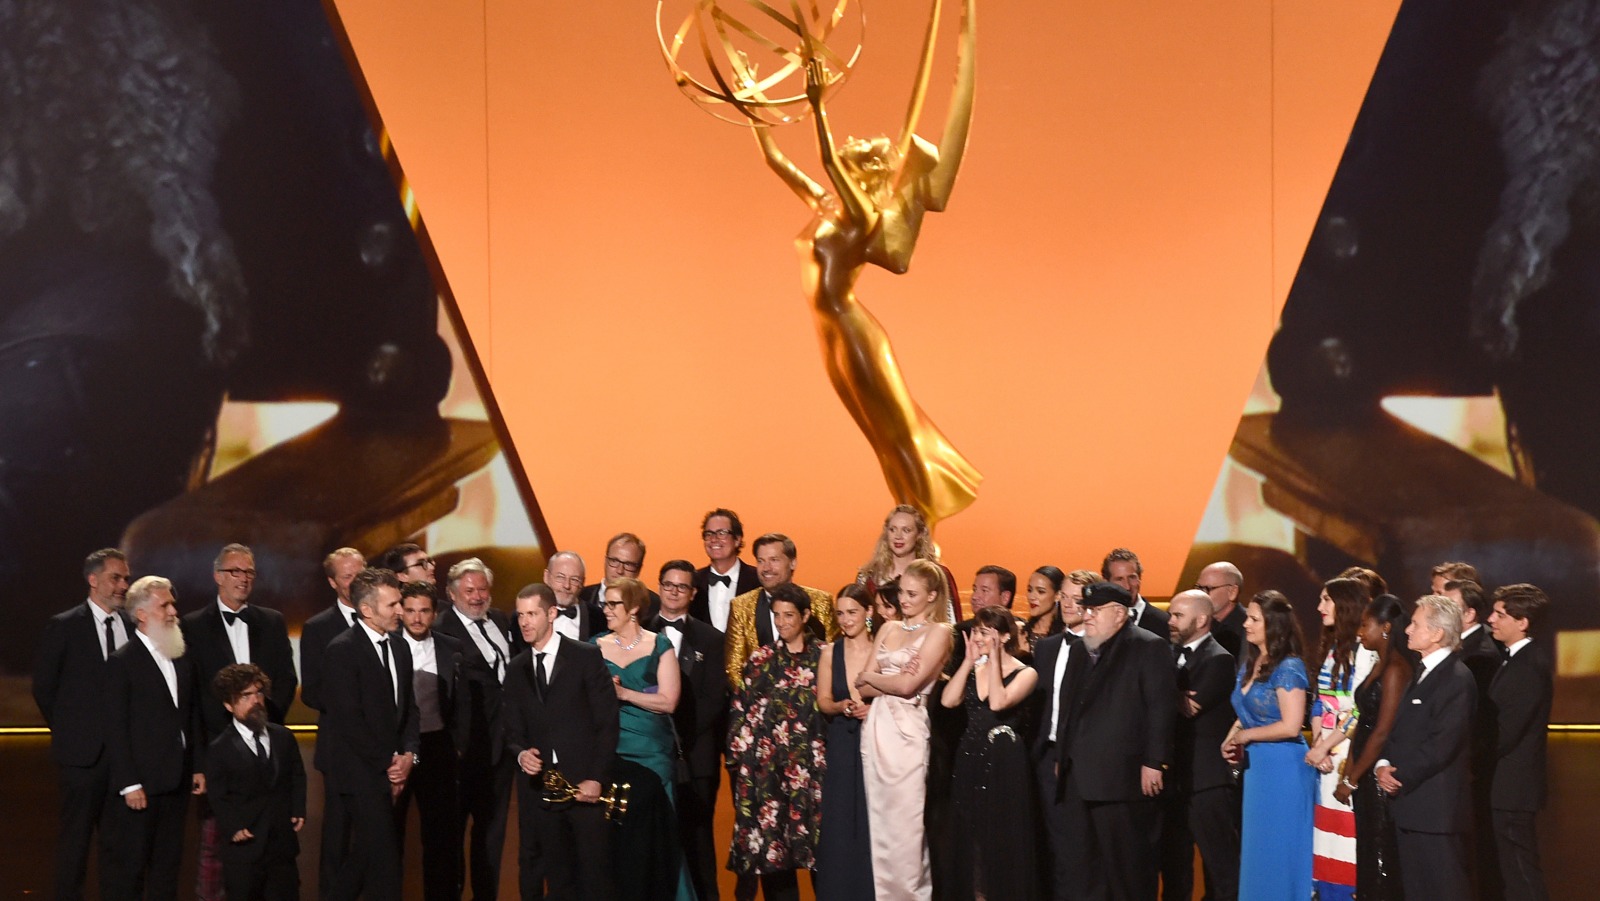 Emmy Awards 2020 Date, Nominations, Predictions And How To Watch